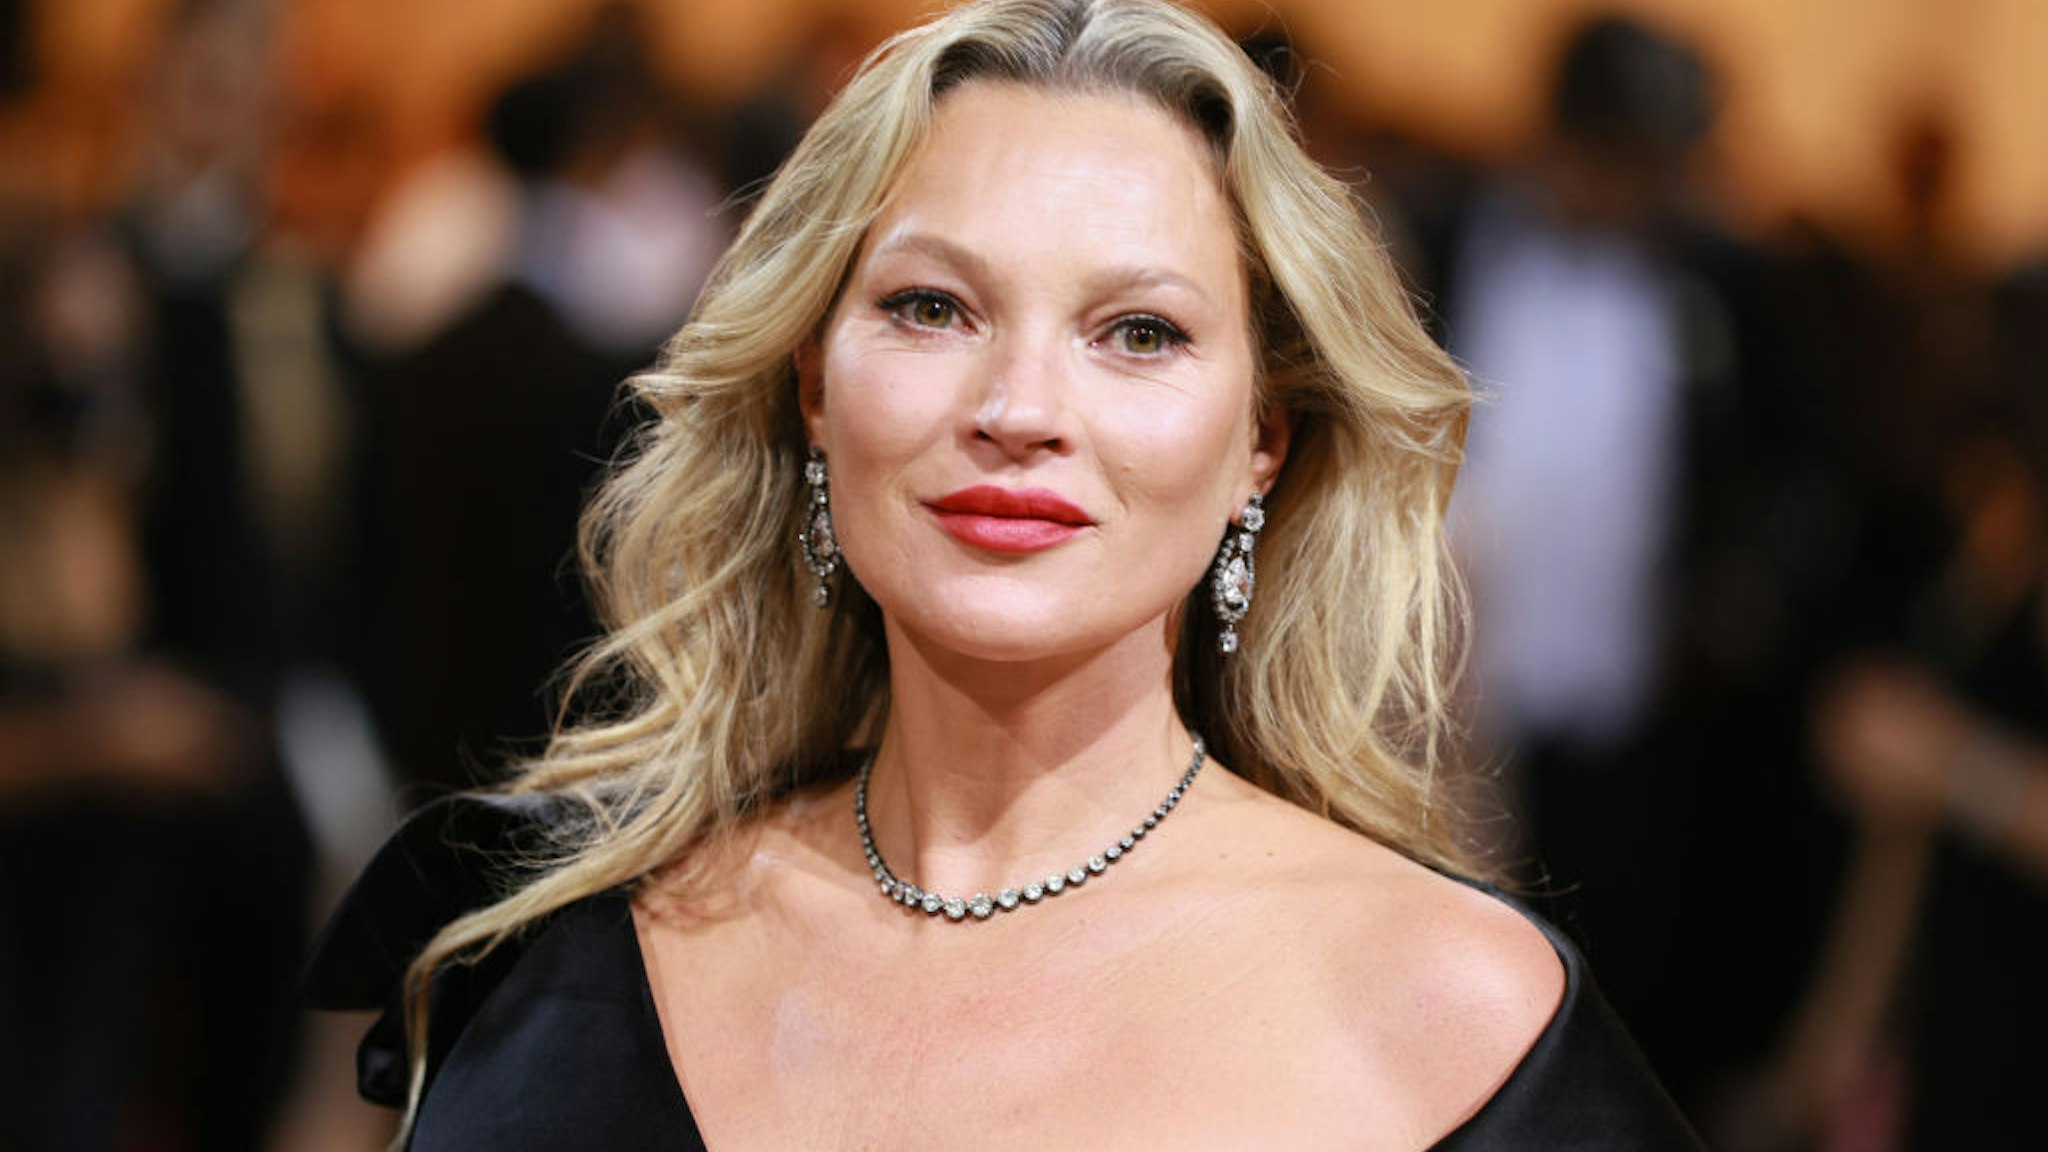 Kate Moss attends The 2022 Met Gala Celebrating "In America: An Anthology of Fashion" at The Metropolitan Museum of Art on May 02, 2022 in New York City.